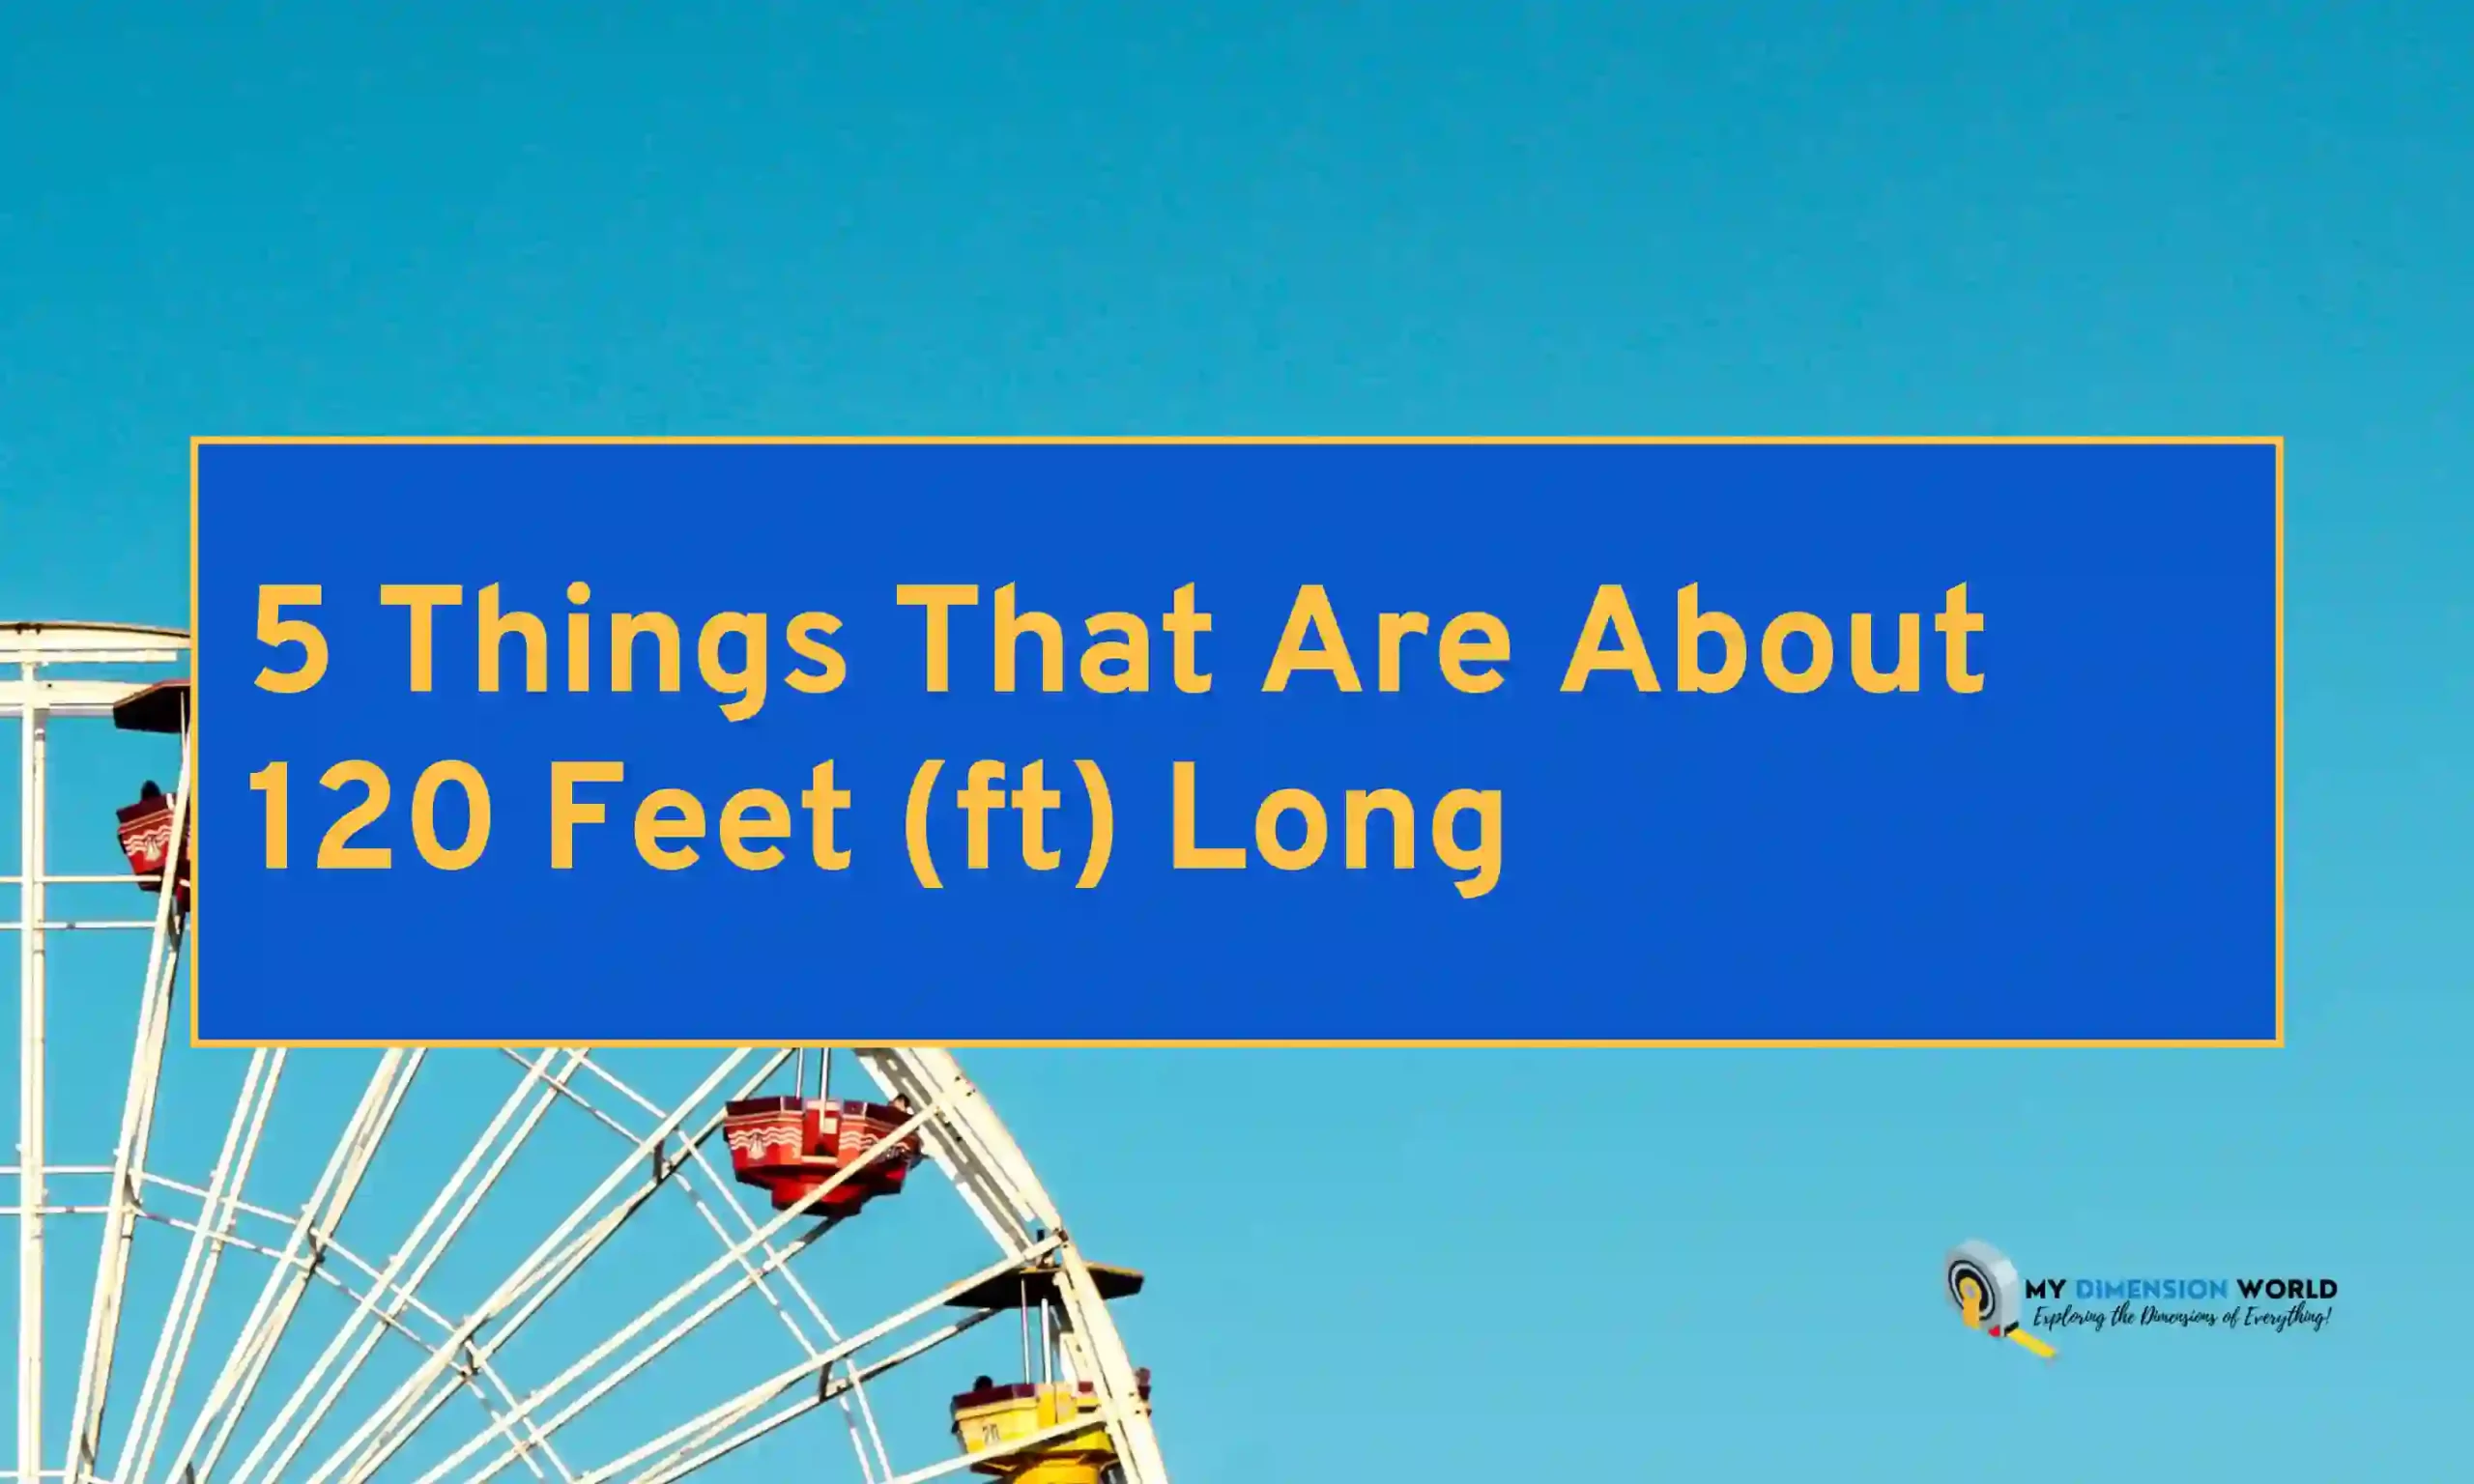 5 Things That Are About 120 Feet (ft) Long